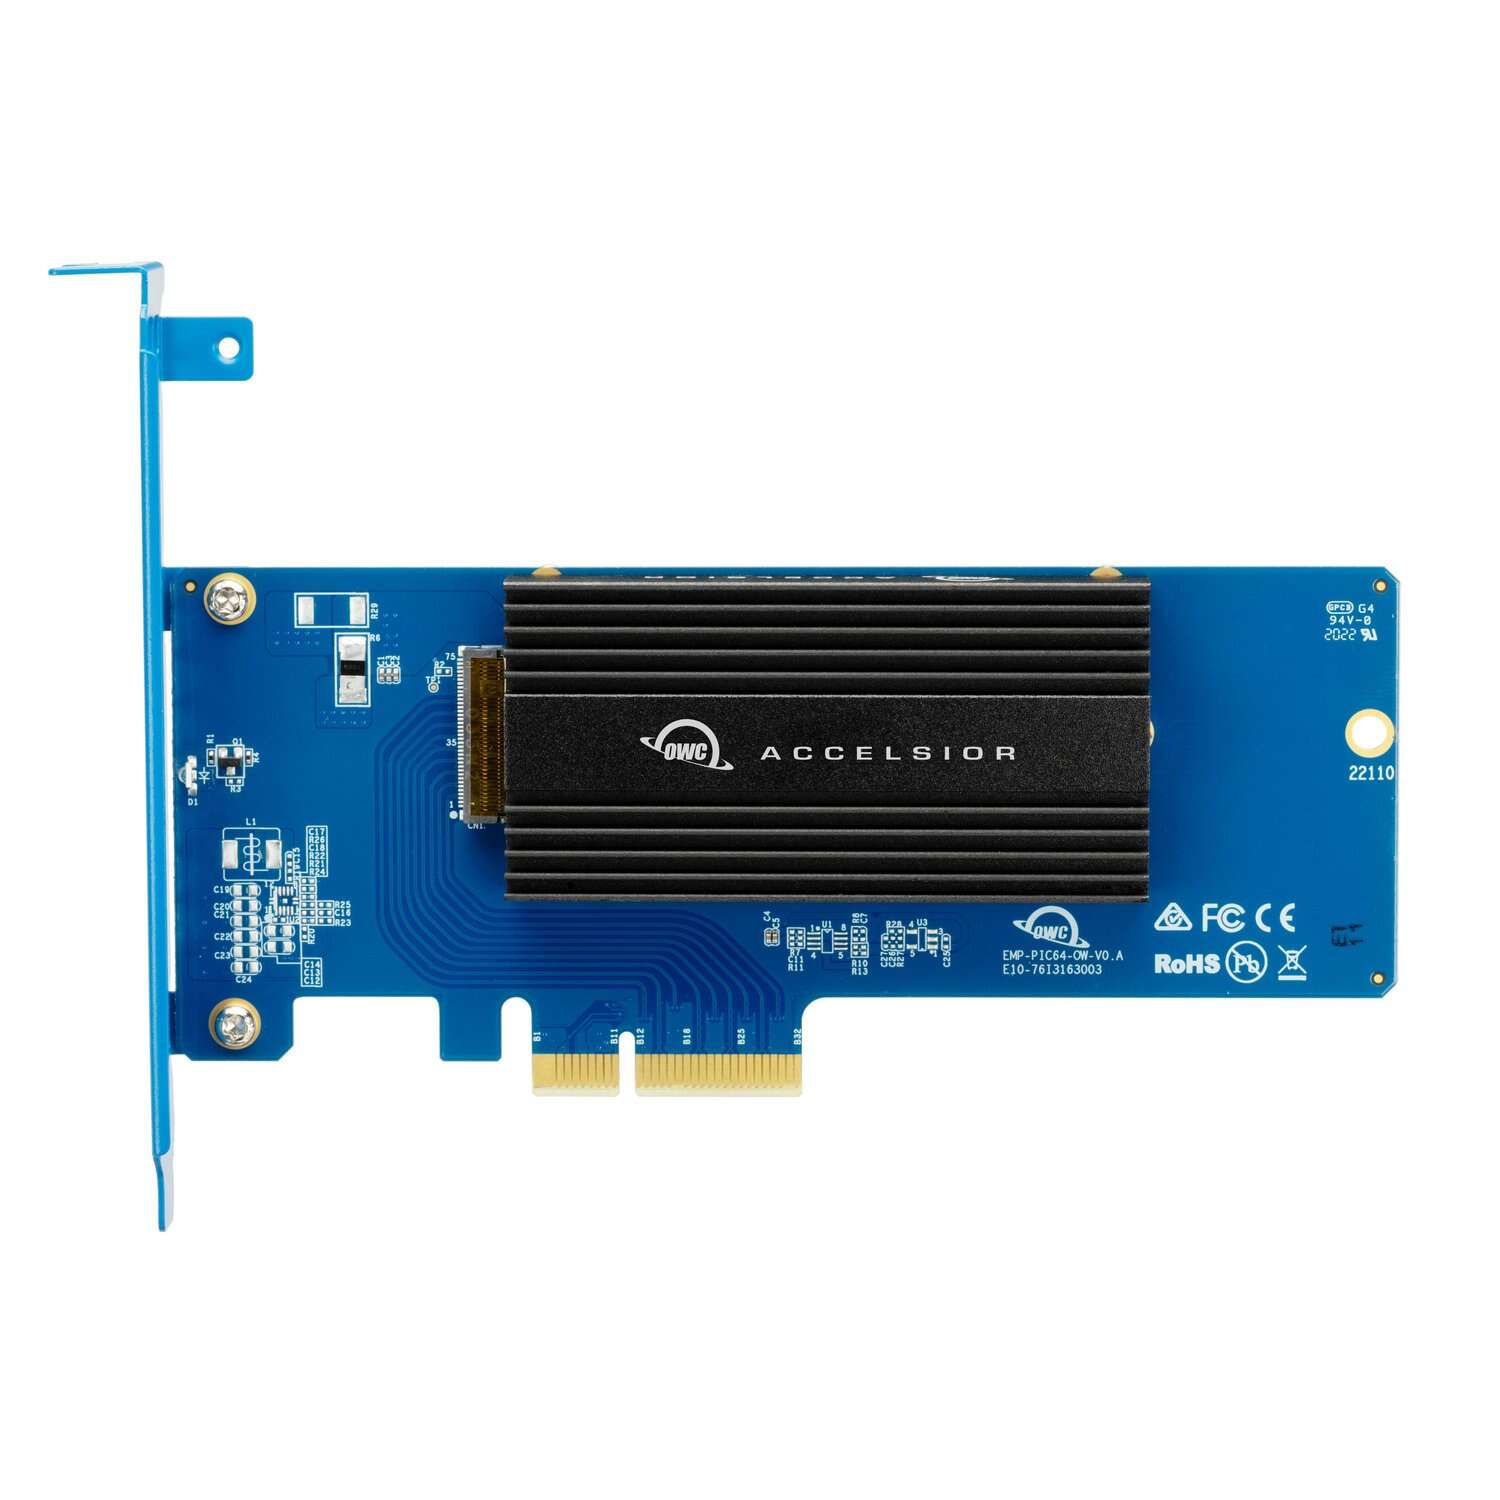 Owc 480gb accelsior 1m2 nvme m.2 ssd pcie ssd (owcsacl1m.5)